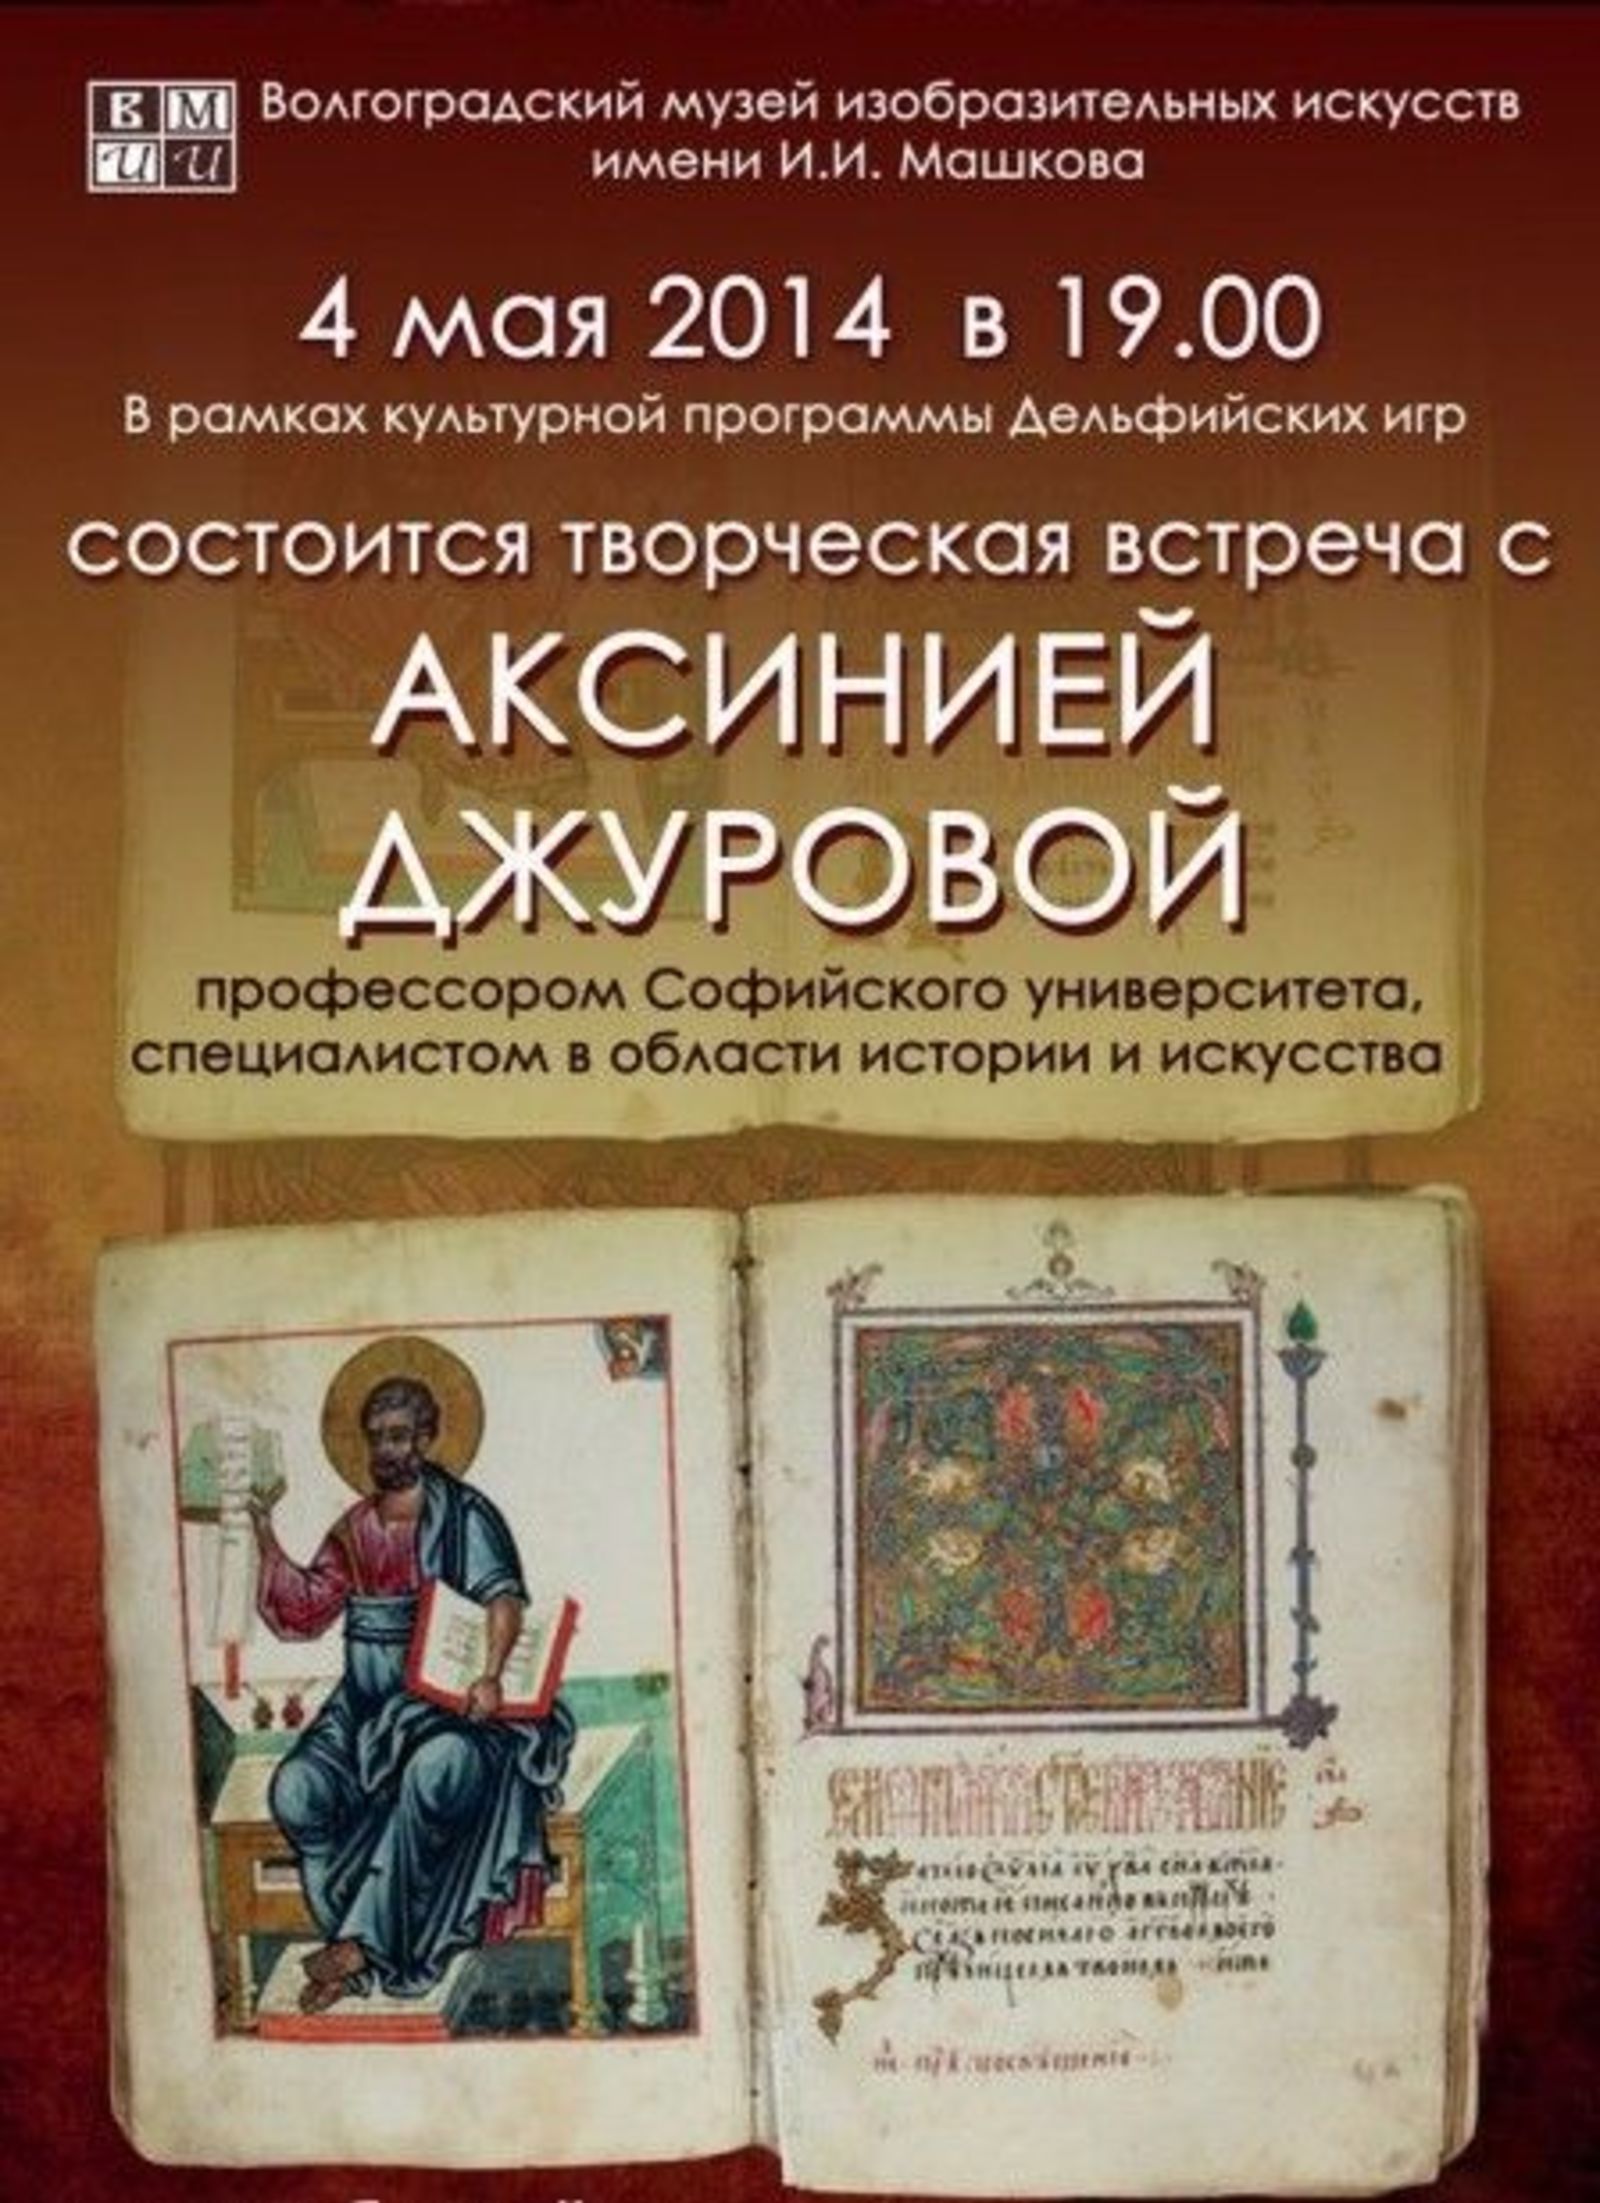 Presenting the Travelling Exhibition "The Light of the Letters" in Volgograd, Russia